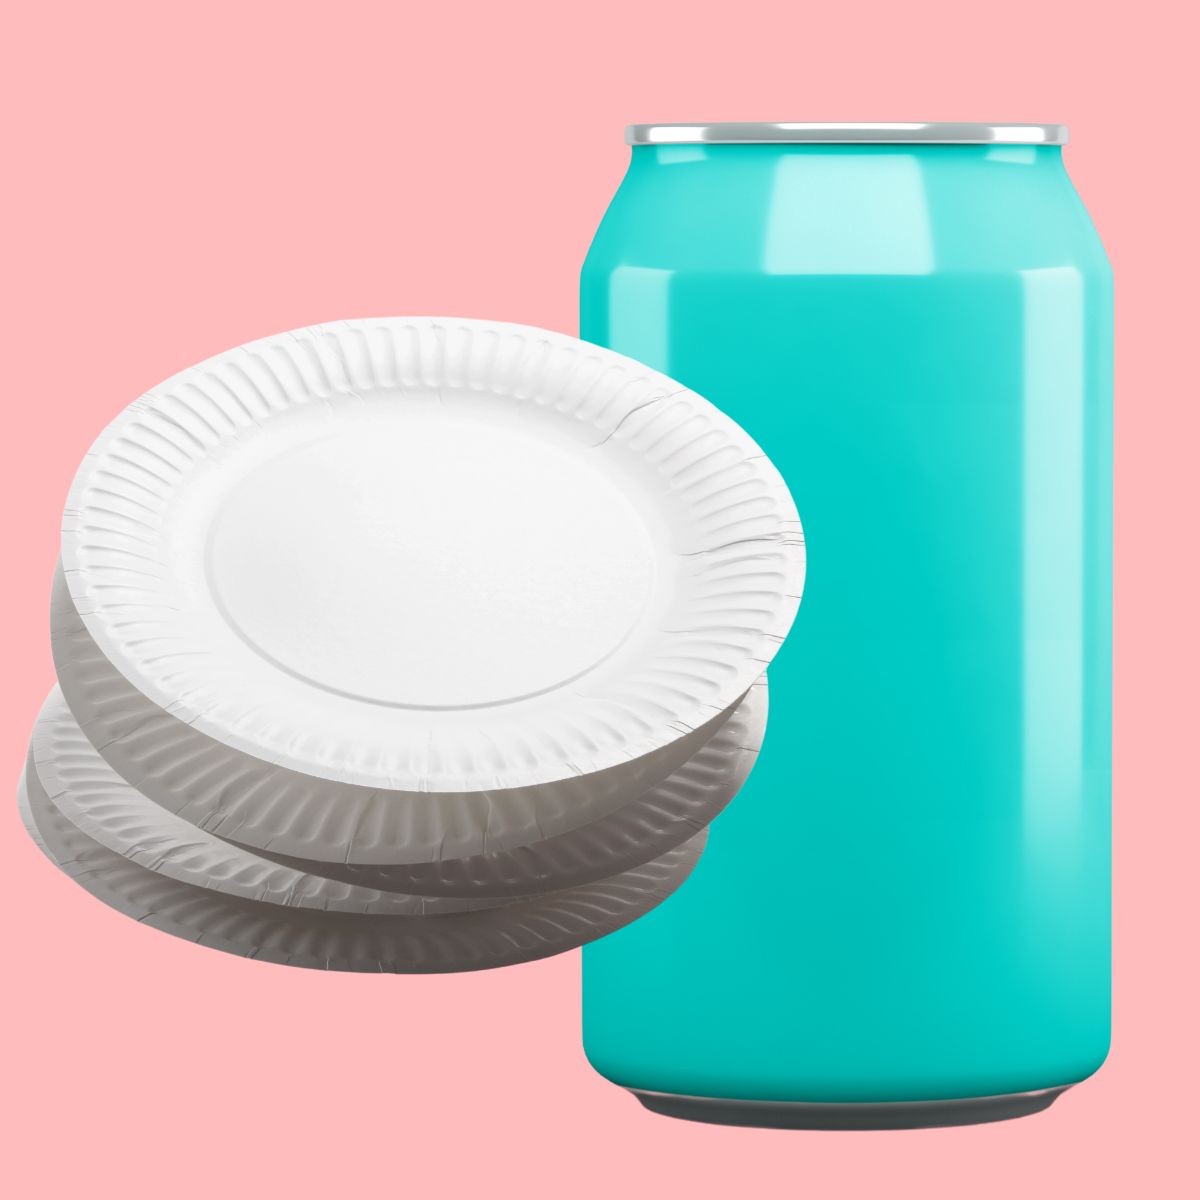 Blue soda can and white paper plates on pink background